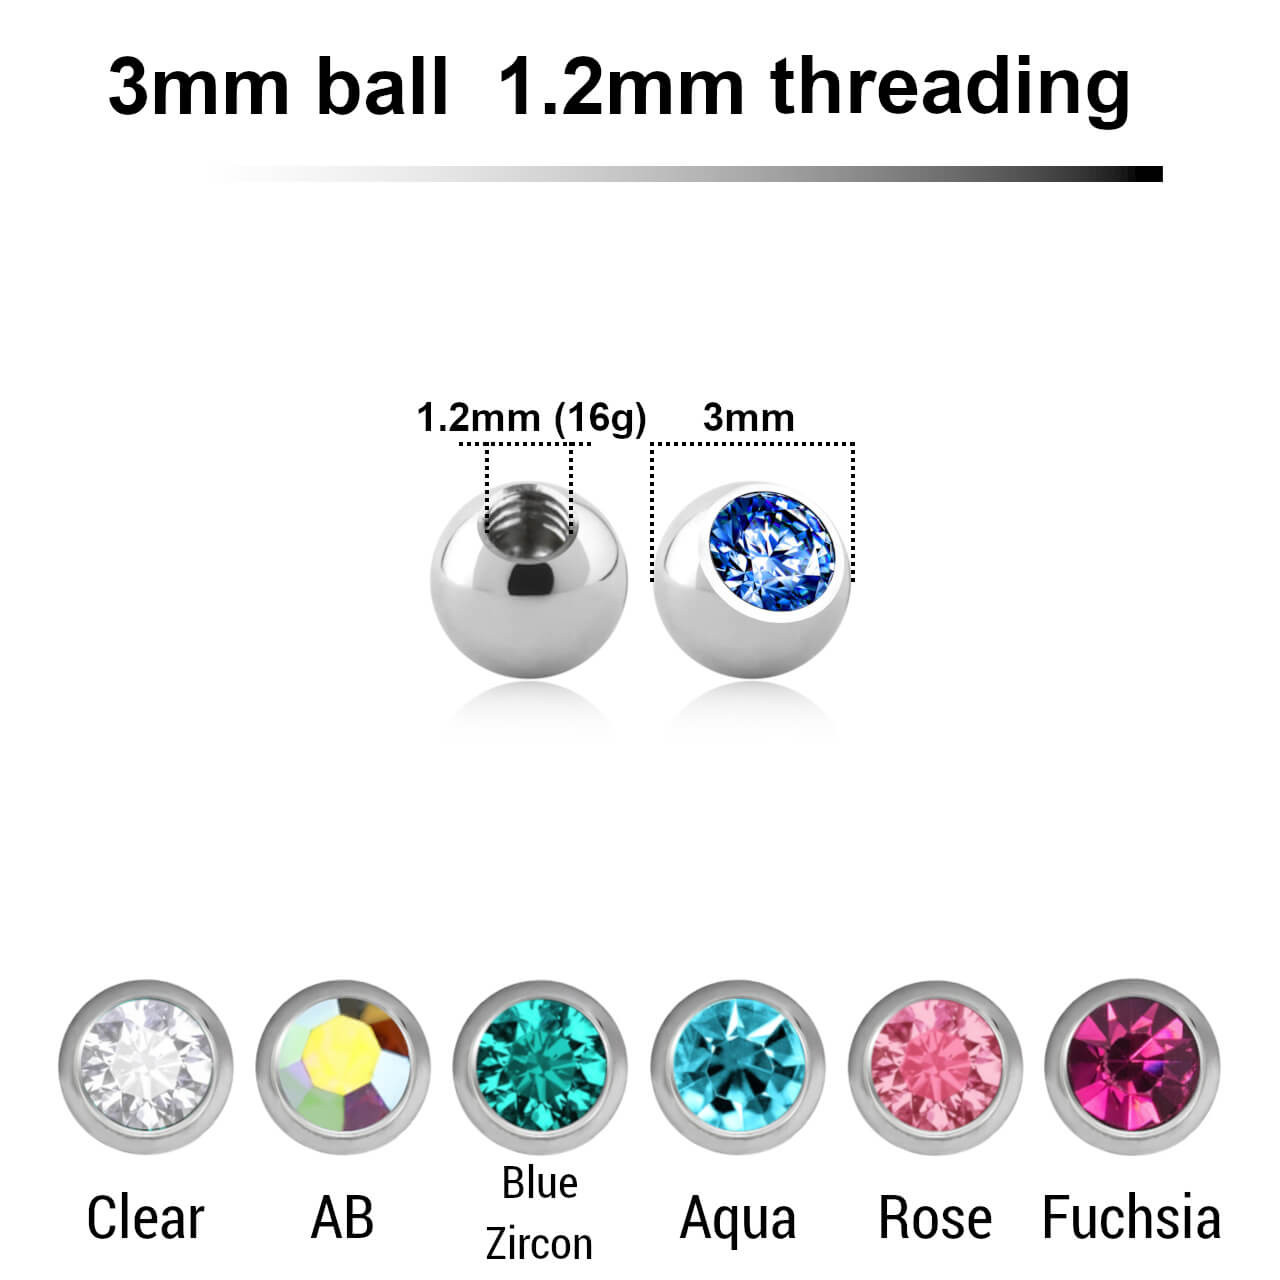 SYB12J3 Piercing studio supplies: Pack of 25 high polished 316L steel balls with a 3mm diameter and a bezel set crystal, 1.2mm threading